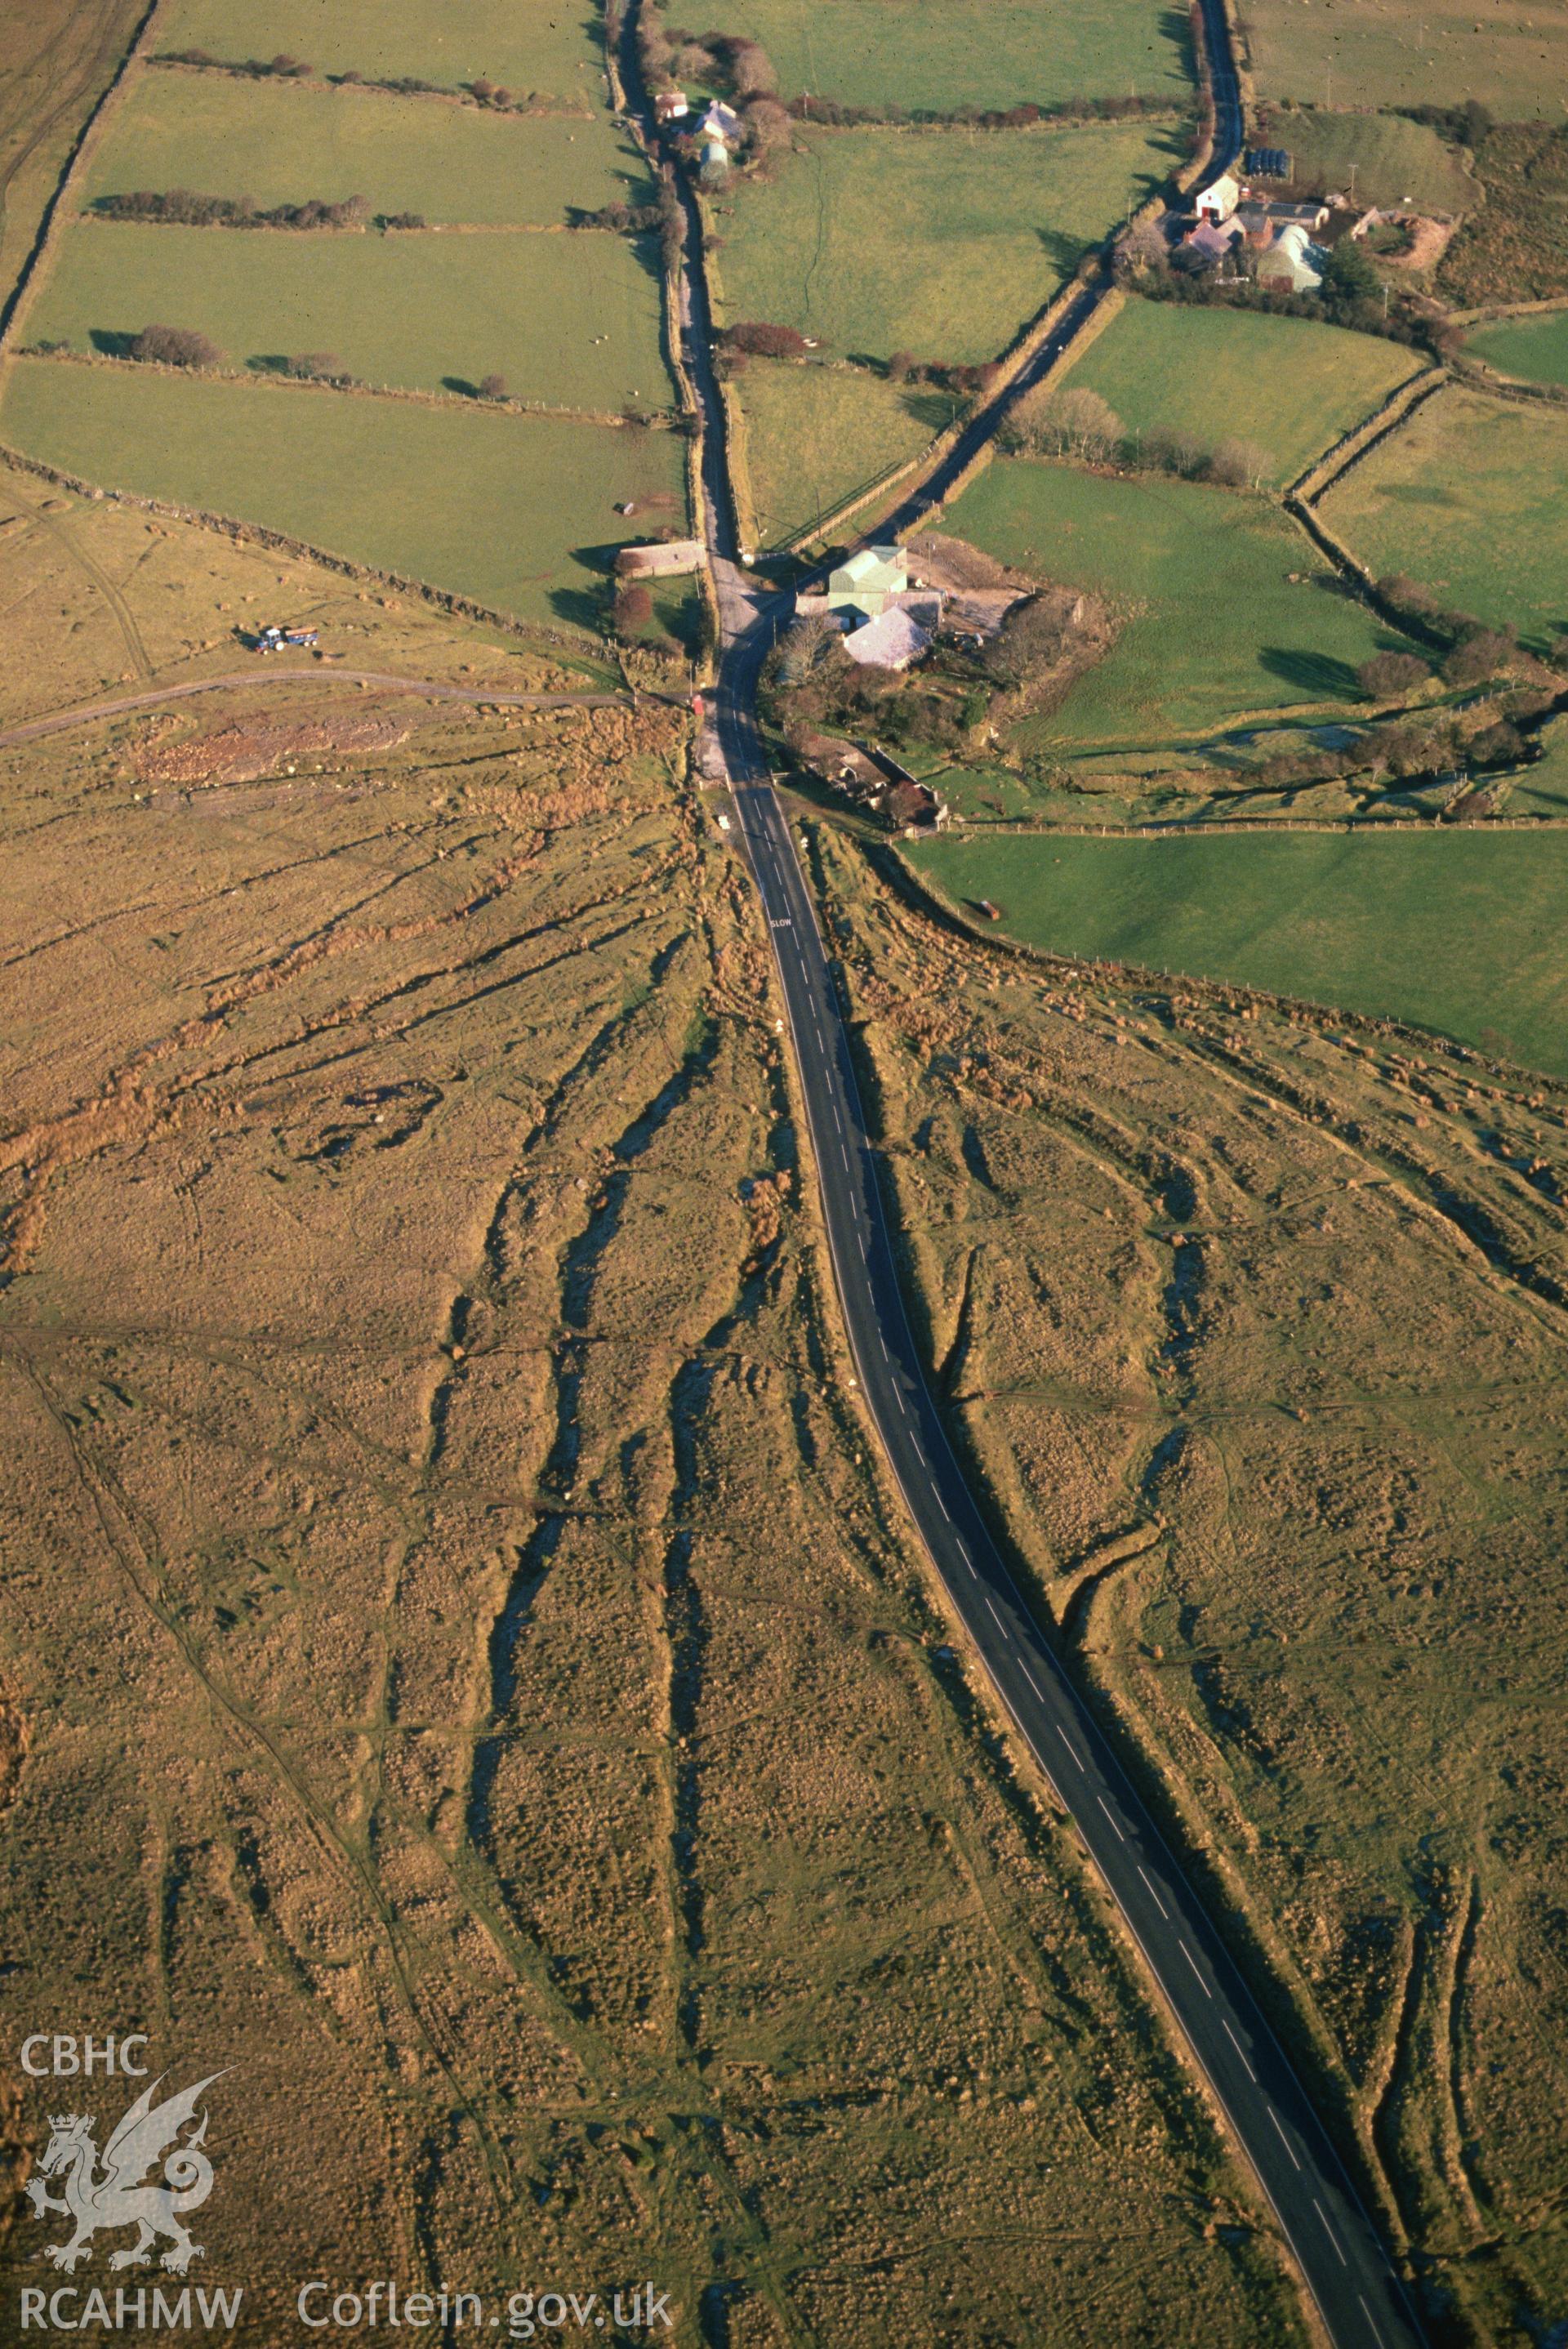 Slide of RCAHMW colour oblique aerial photograph of Tafarn-y-bwlch, taken by C.R. Musson, 15/12/1990.